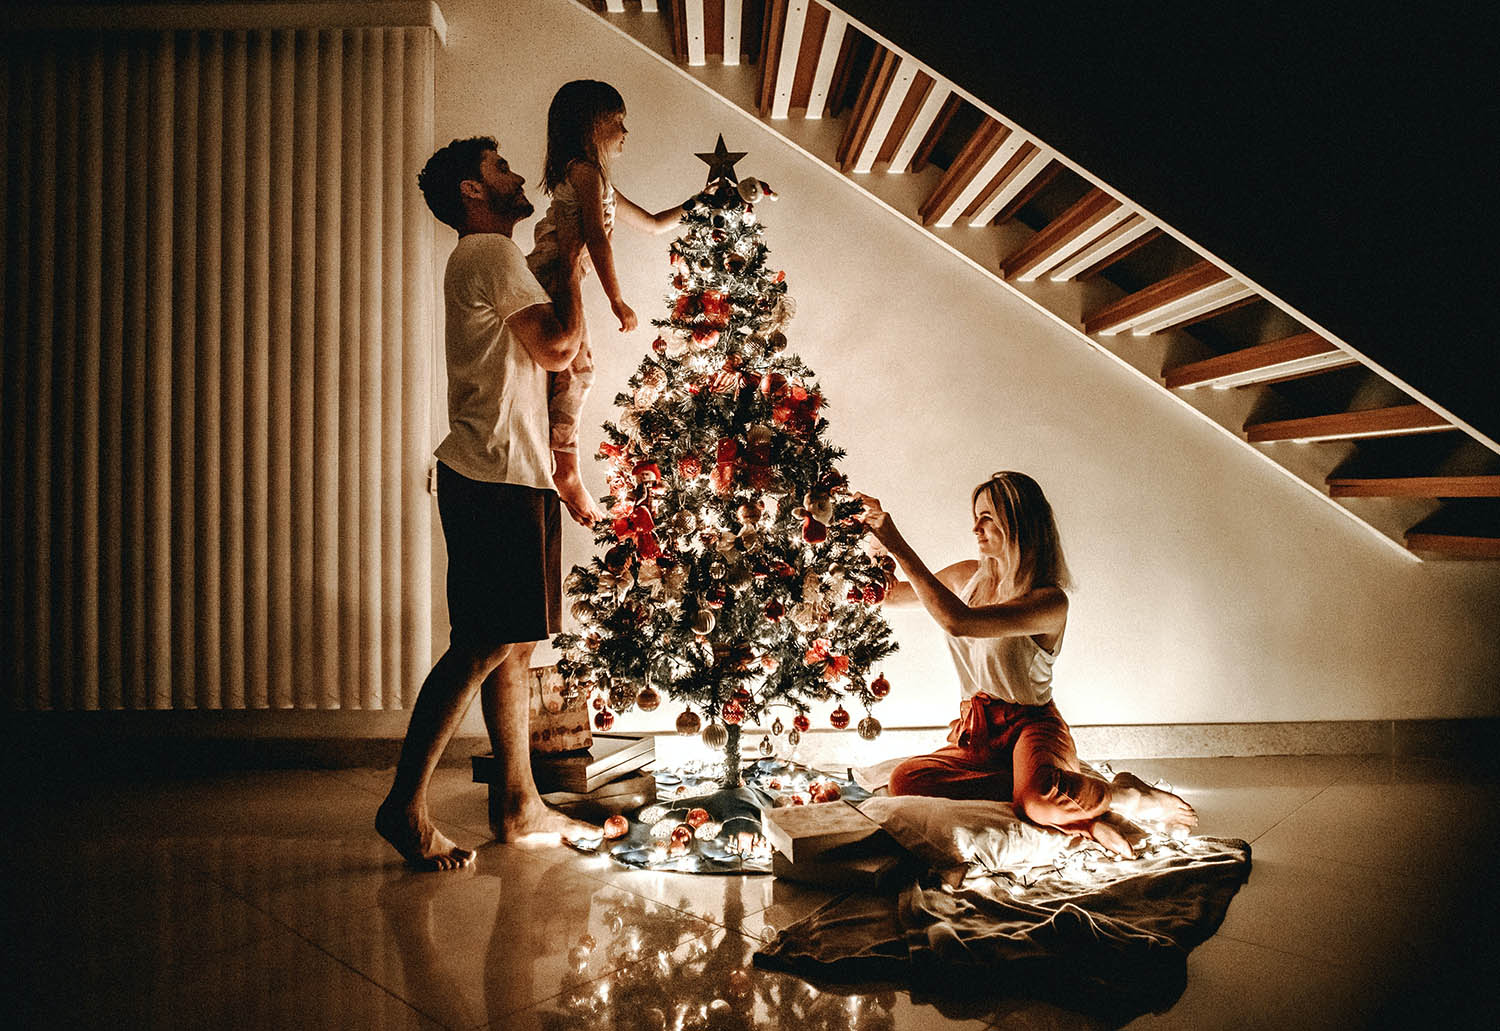 Christmas is a Time When We See a Spike in Domestic Violence